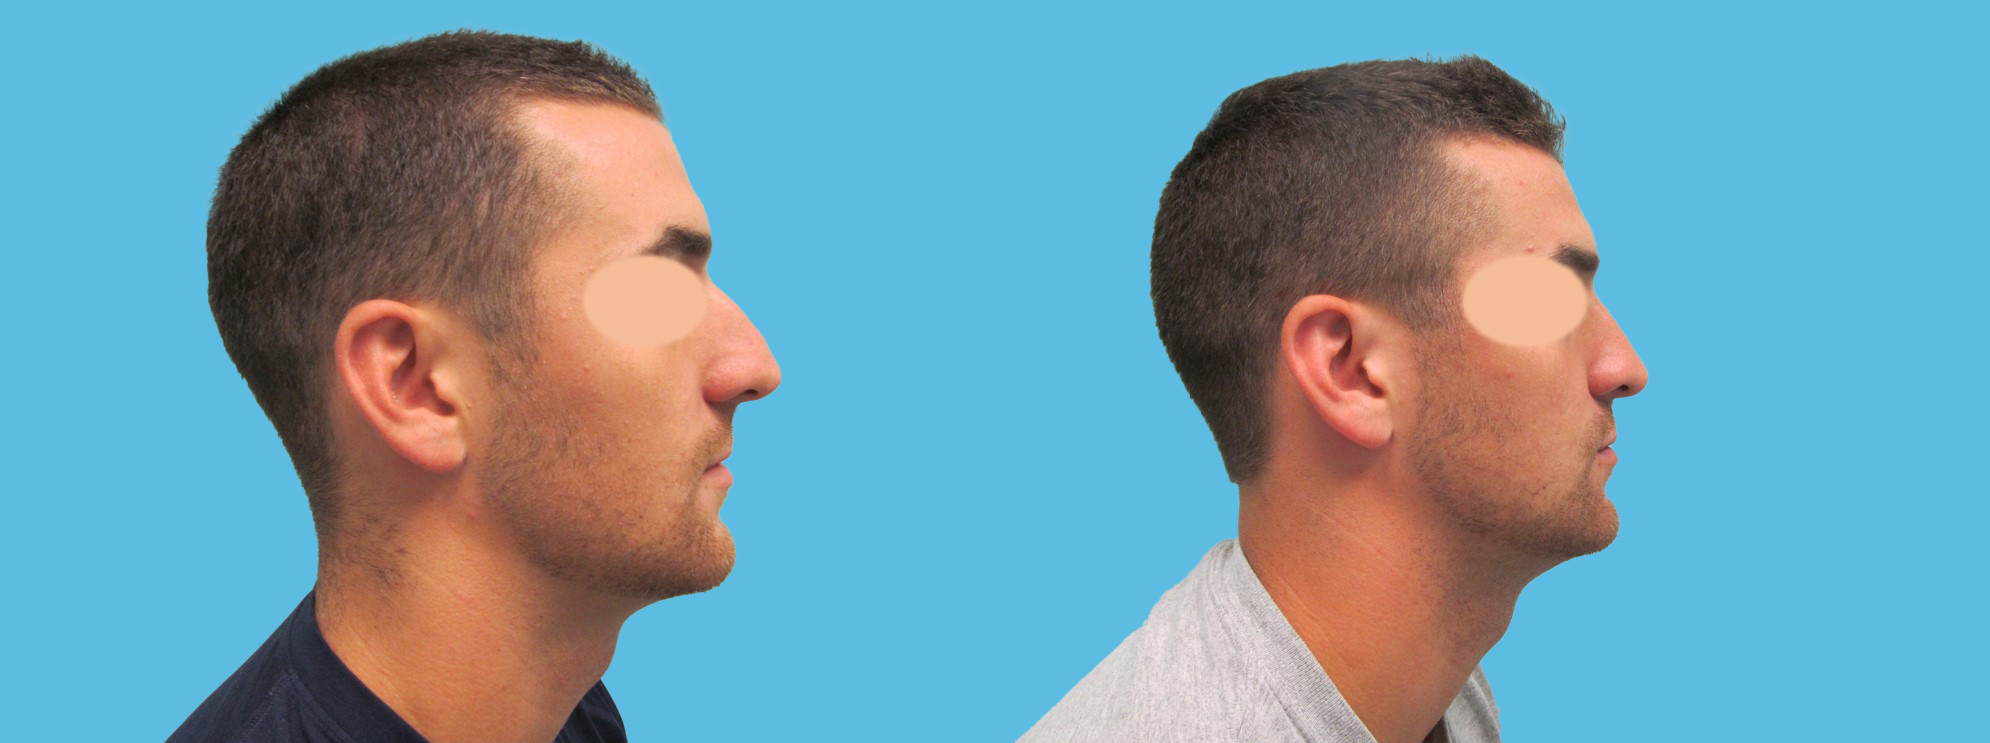 1 year rhinoplasty (preserved masculine features)